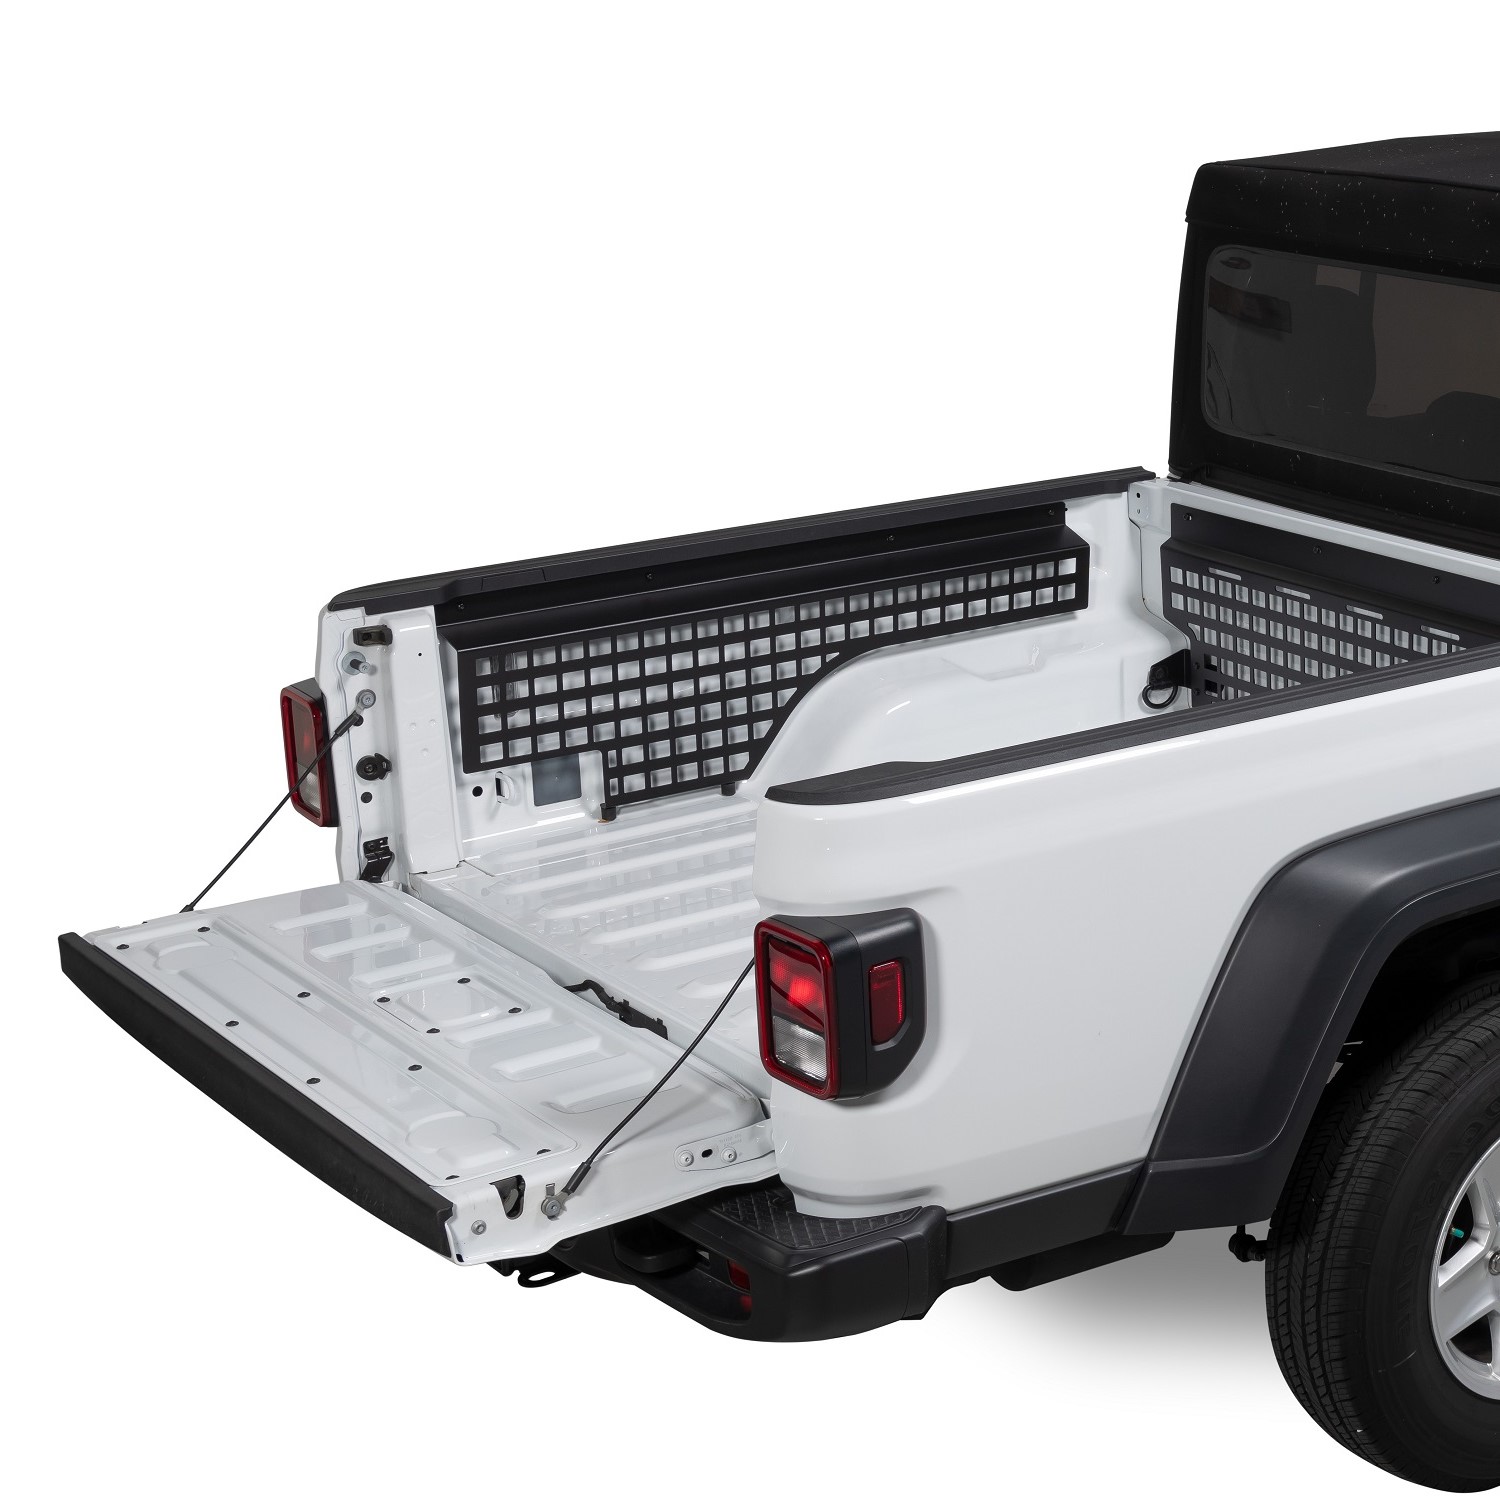 Hansen Styling Parts - Tonneau cover for Jeep Gladiator